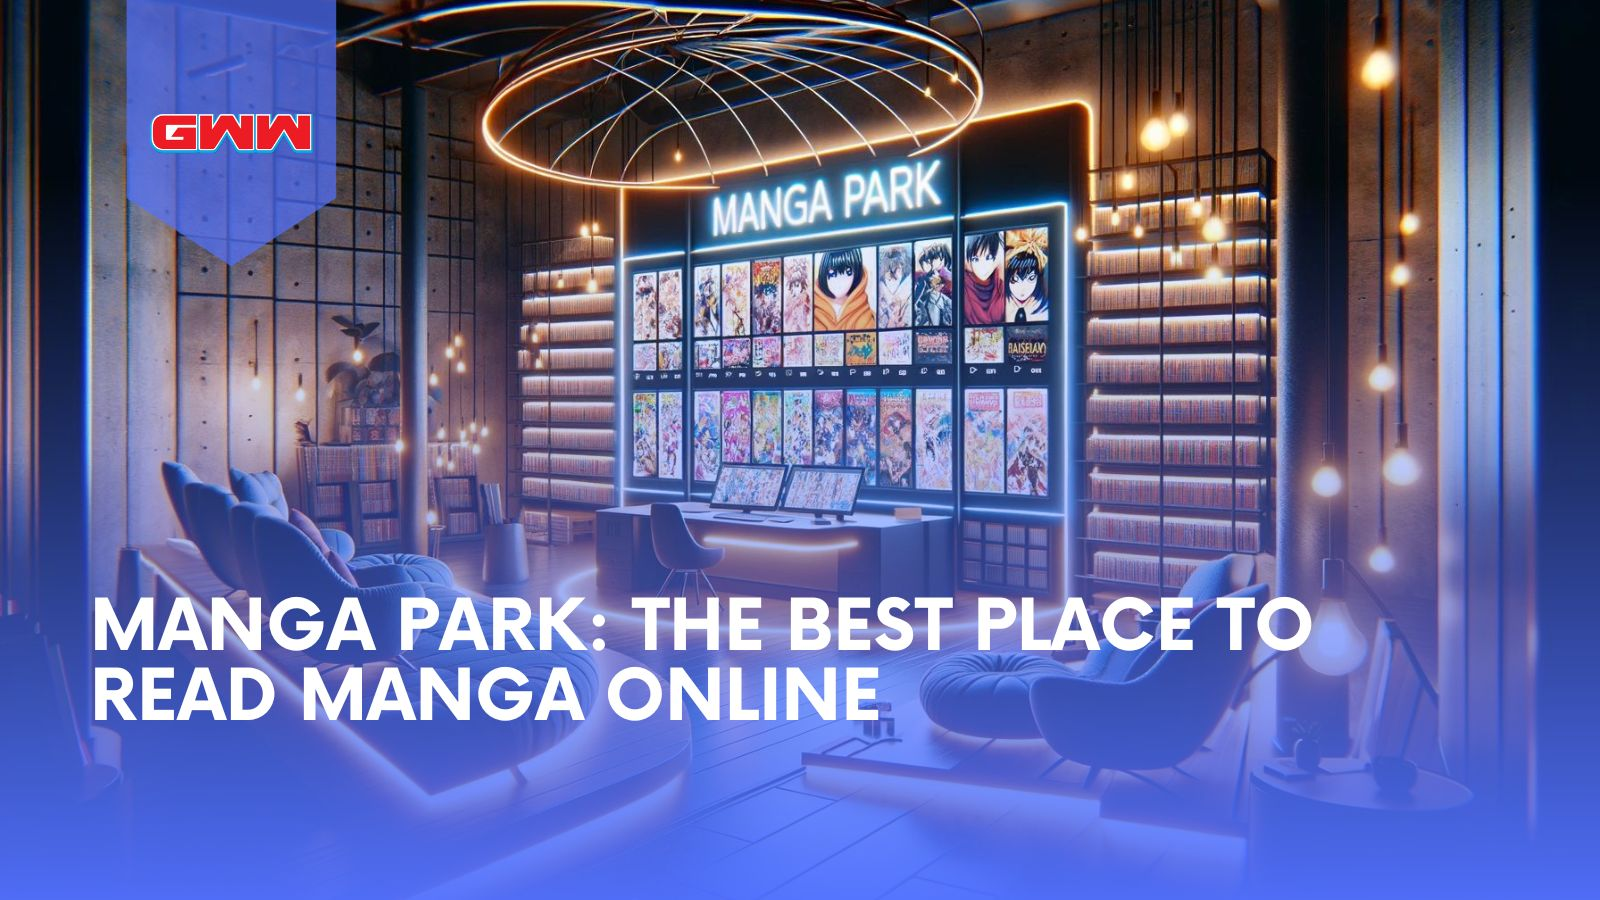 Manga Park: The Best Place to Read Manga Online